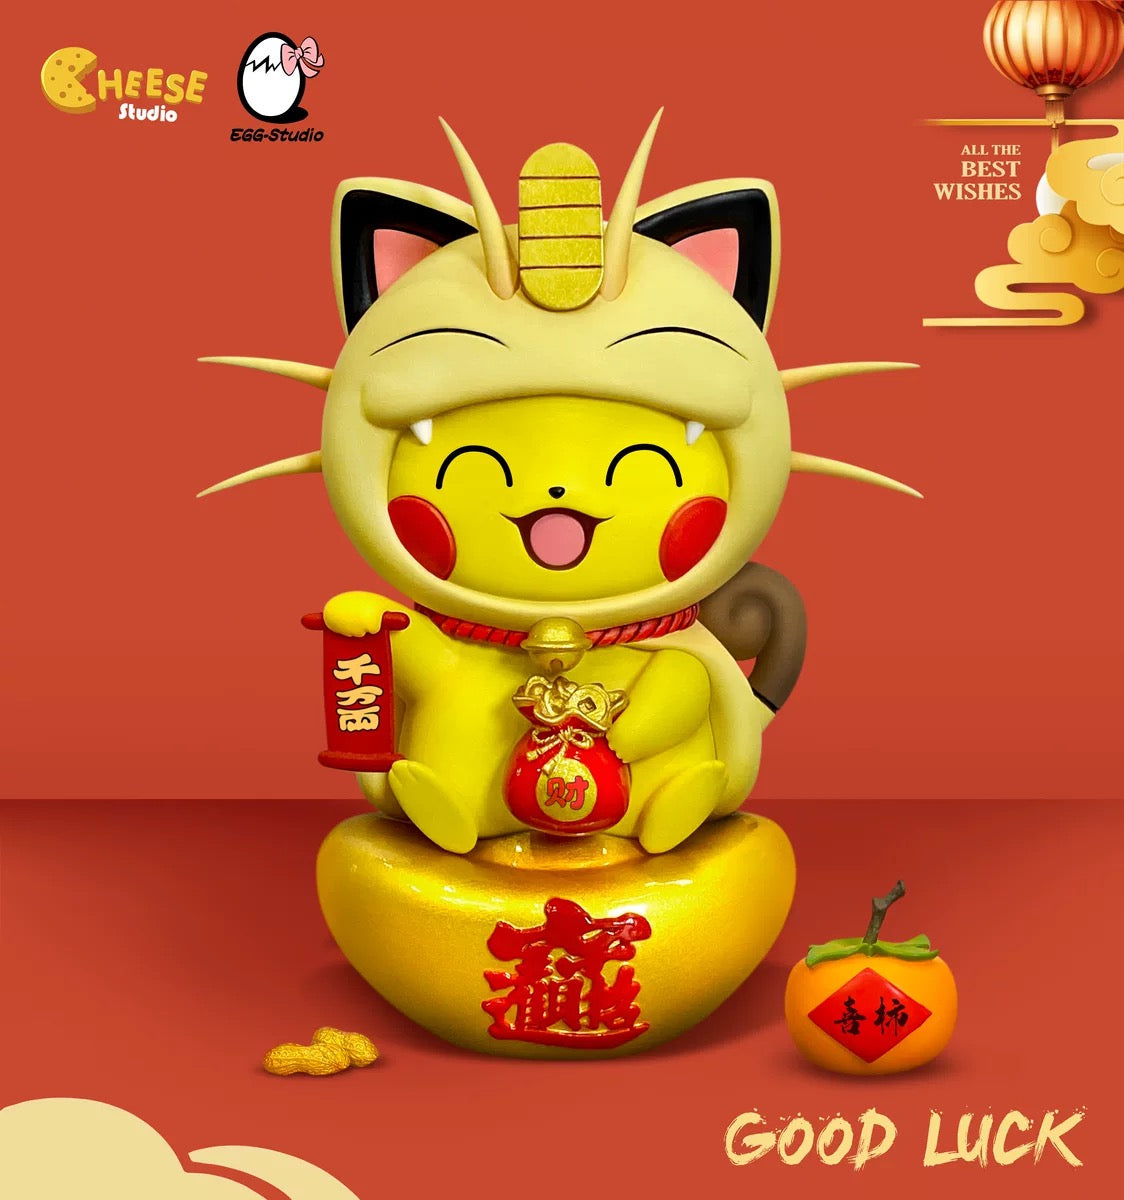 EGG Studio - Chinese New Year Cosplay Meowth [PRE-ORDER CLOSED]